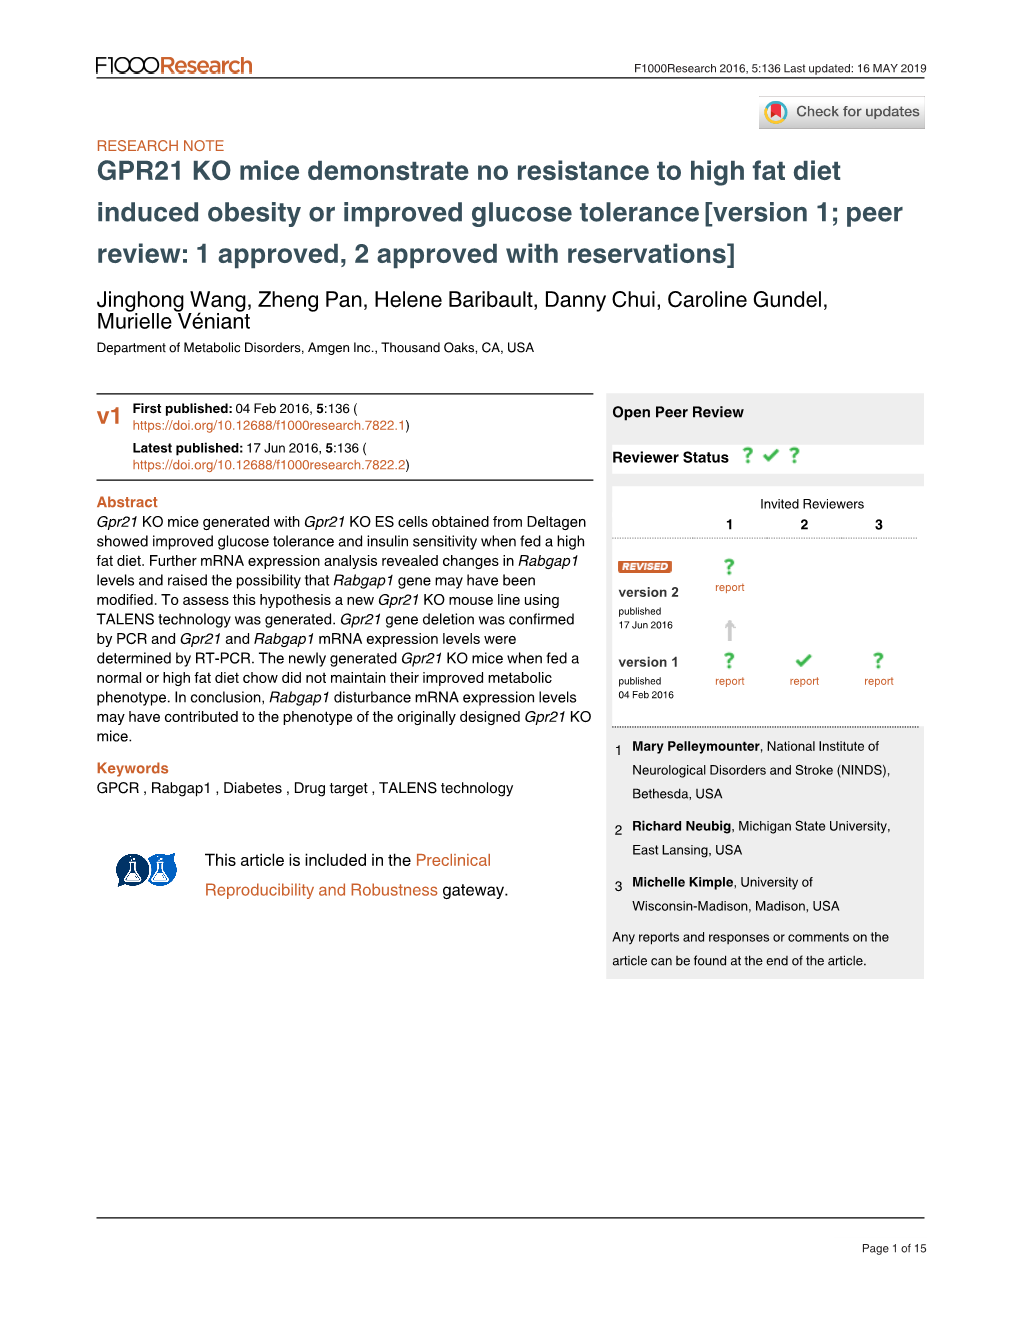 GPR21 KO Mice Demonstrate No Resistance to High Fat Diet Induced